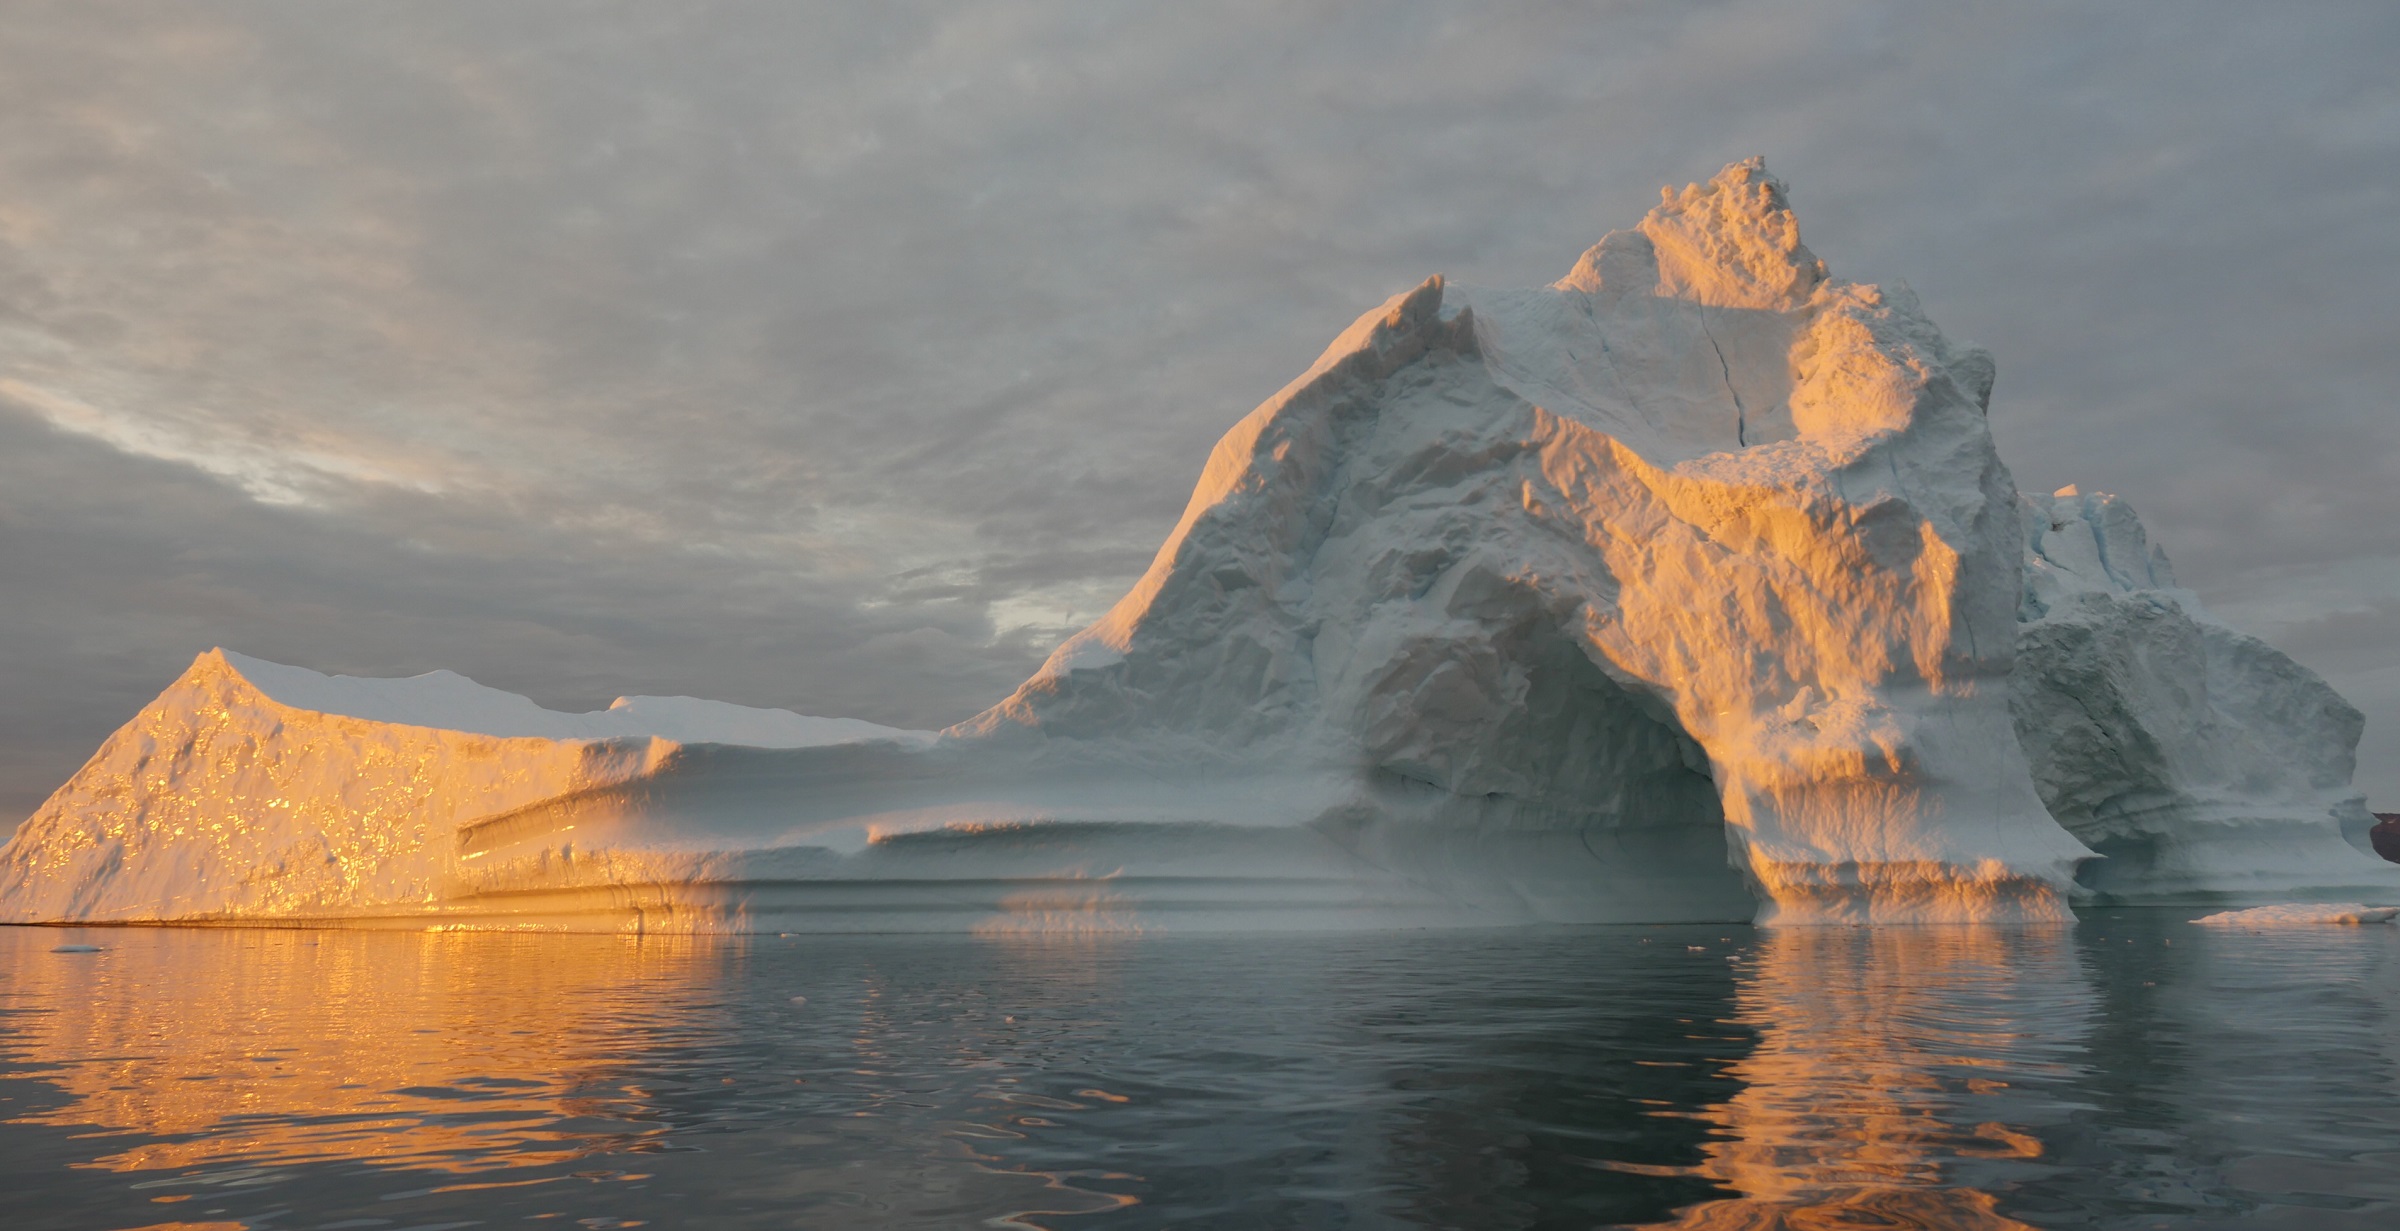 An iceberg floats in Disko Bay, near Ilulissat, Greenland, on July 24, 2015. The massive Greenland ice sheet is shedding about 300 gigatons of ice a year into the ocean, making it the single largest source of sea level rise from melting ice. Credits: NASA/Saskia Madlener